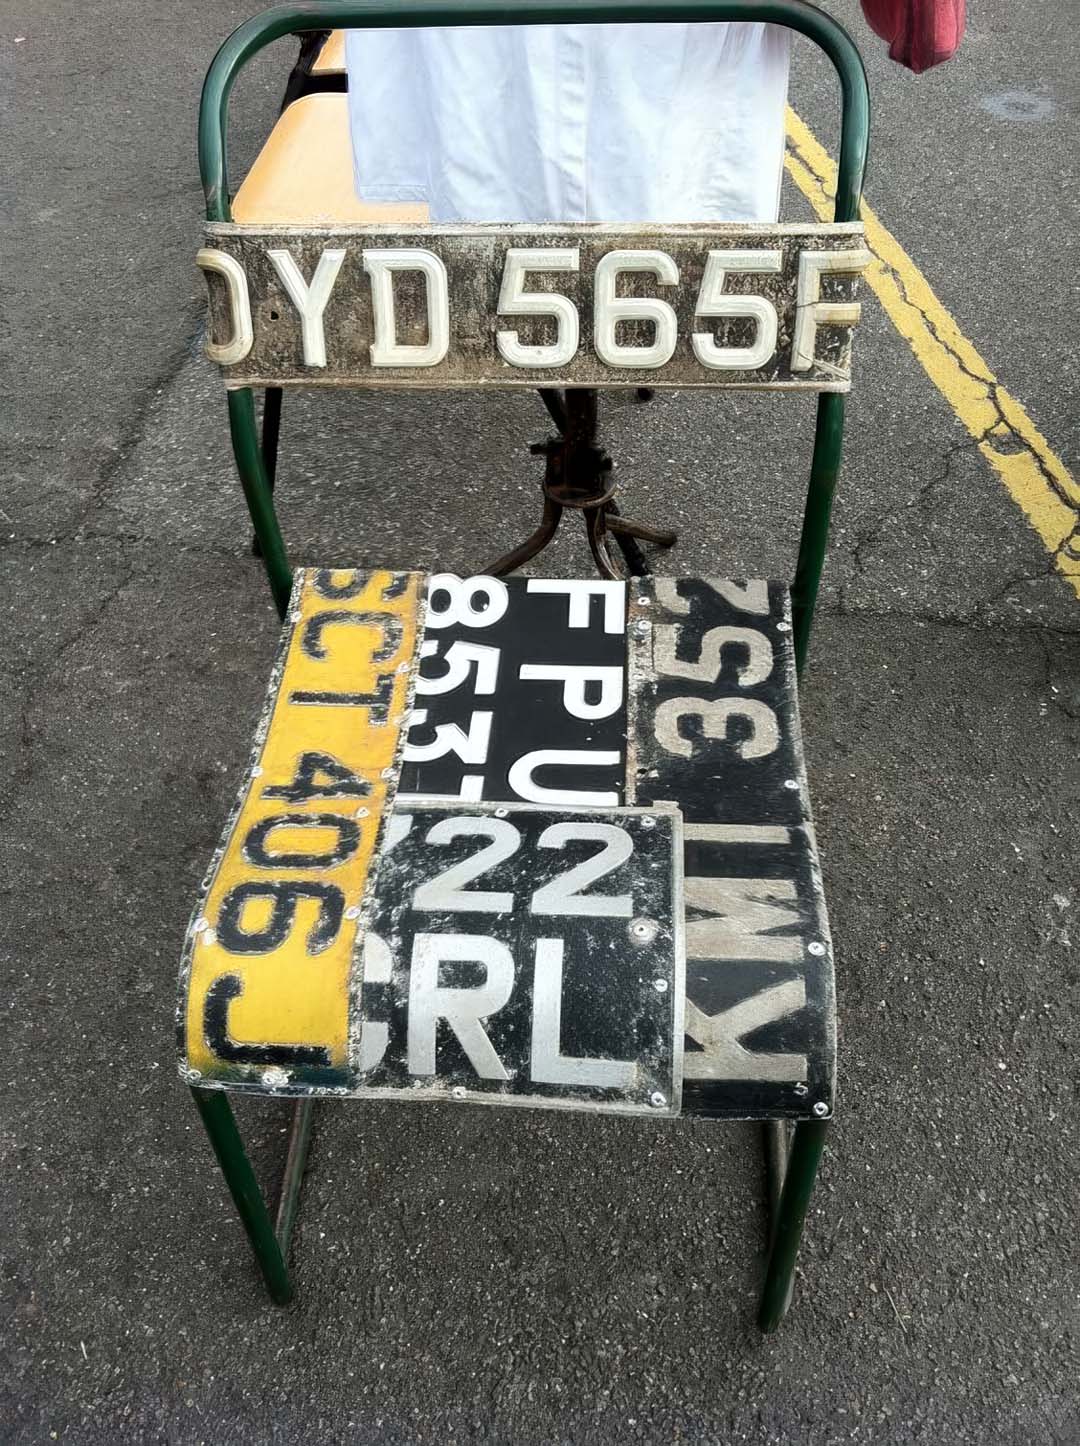 Small chair made from UK license plates